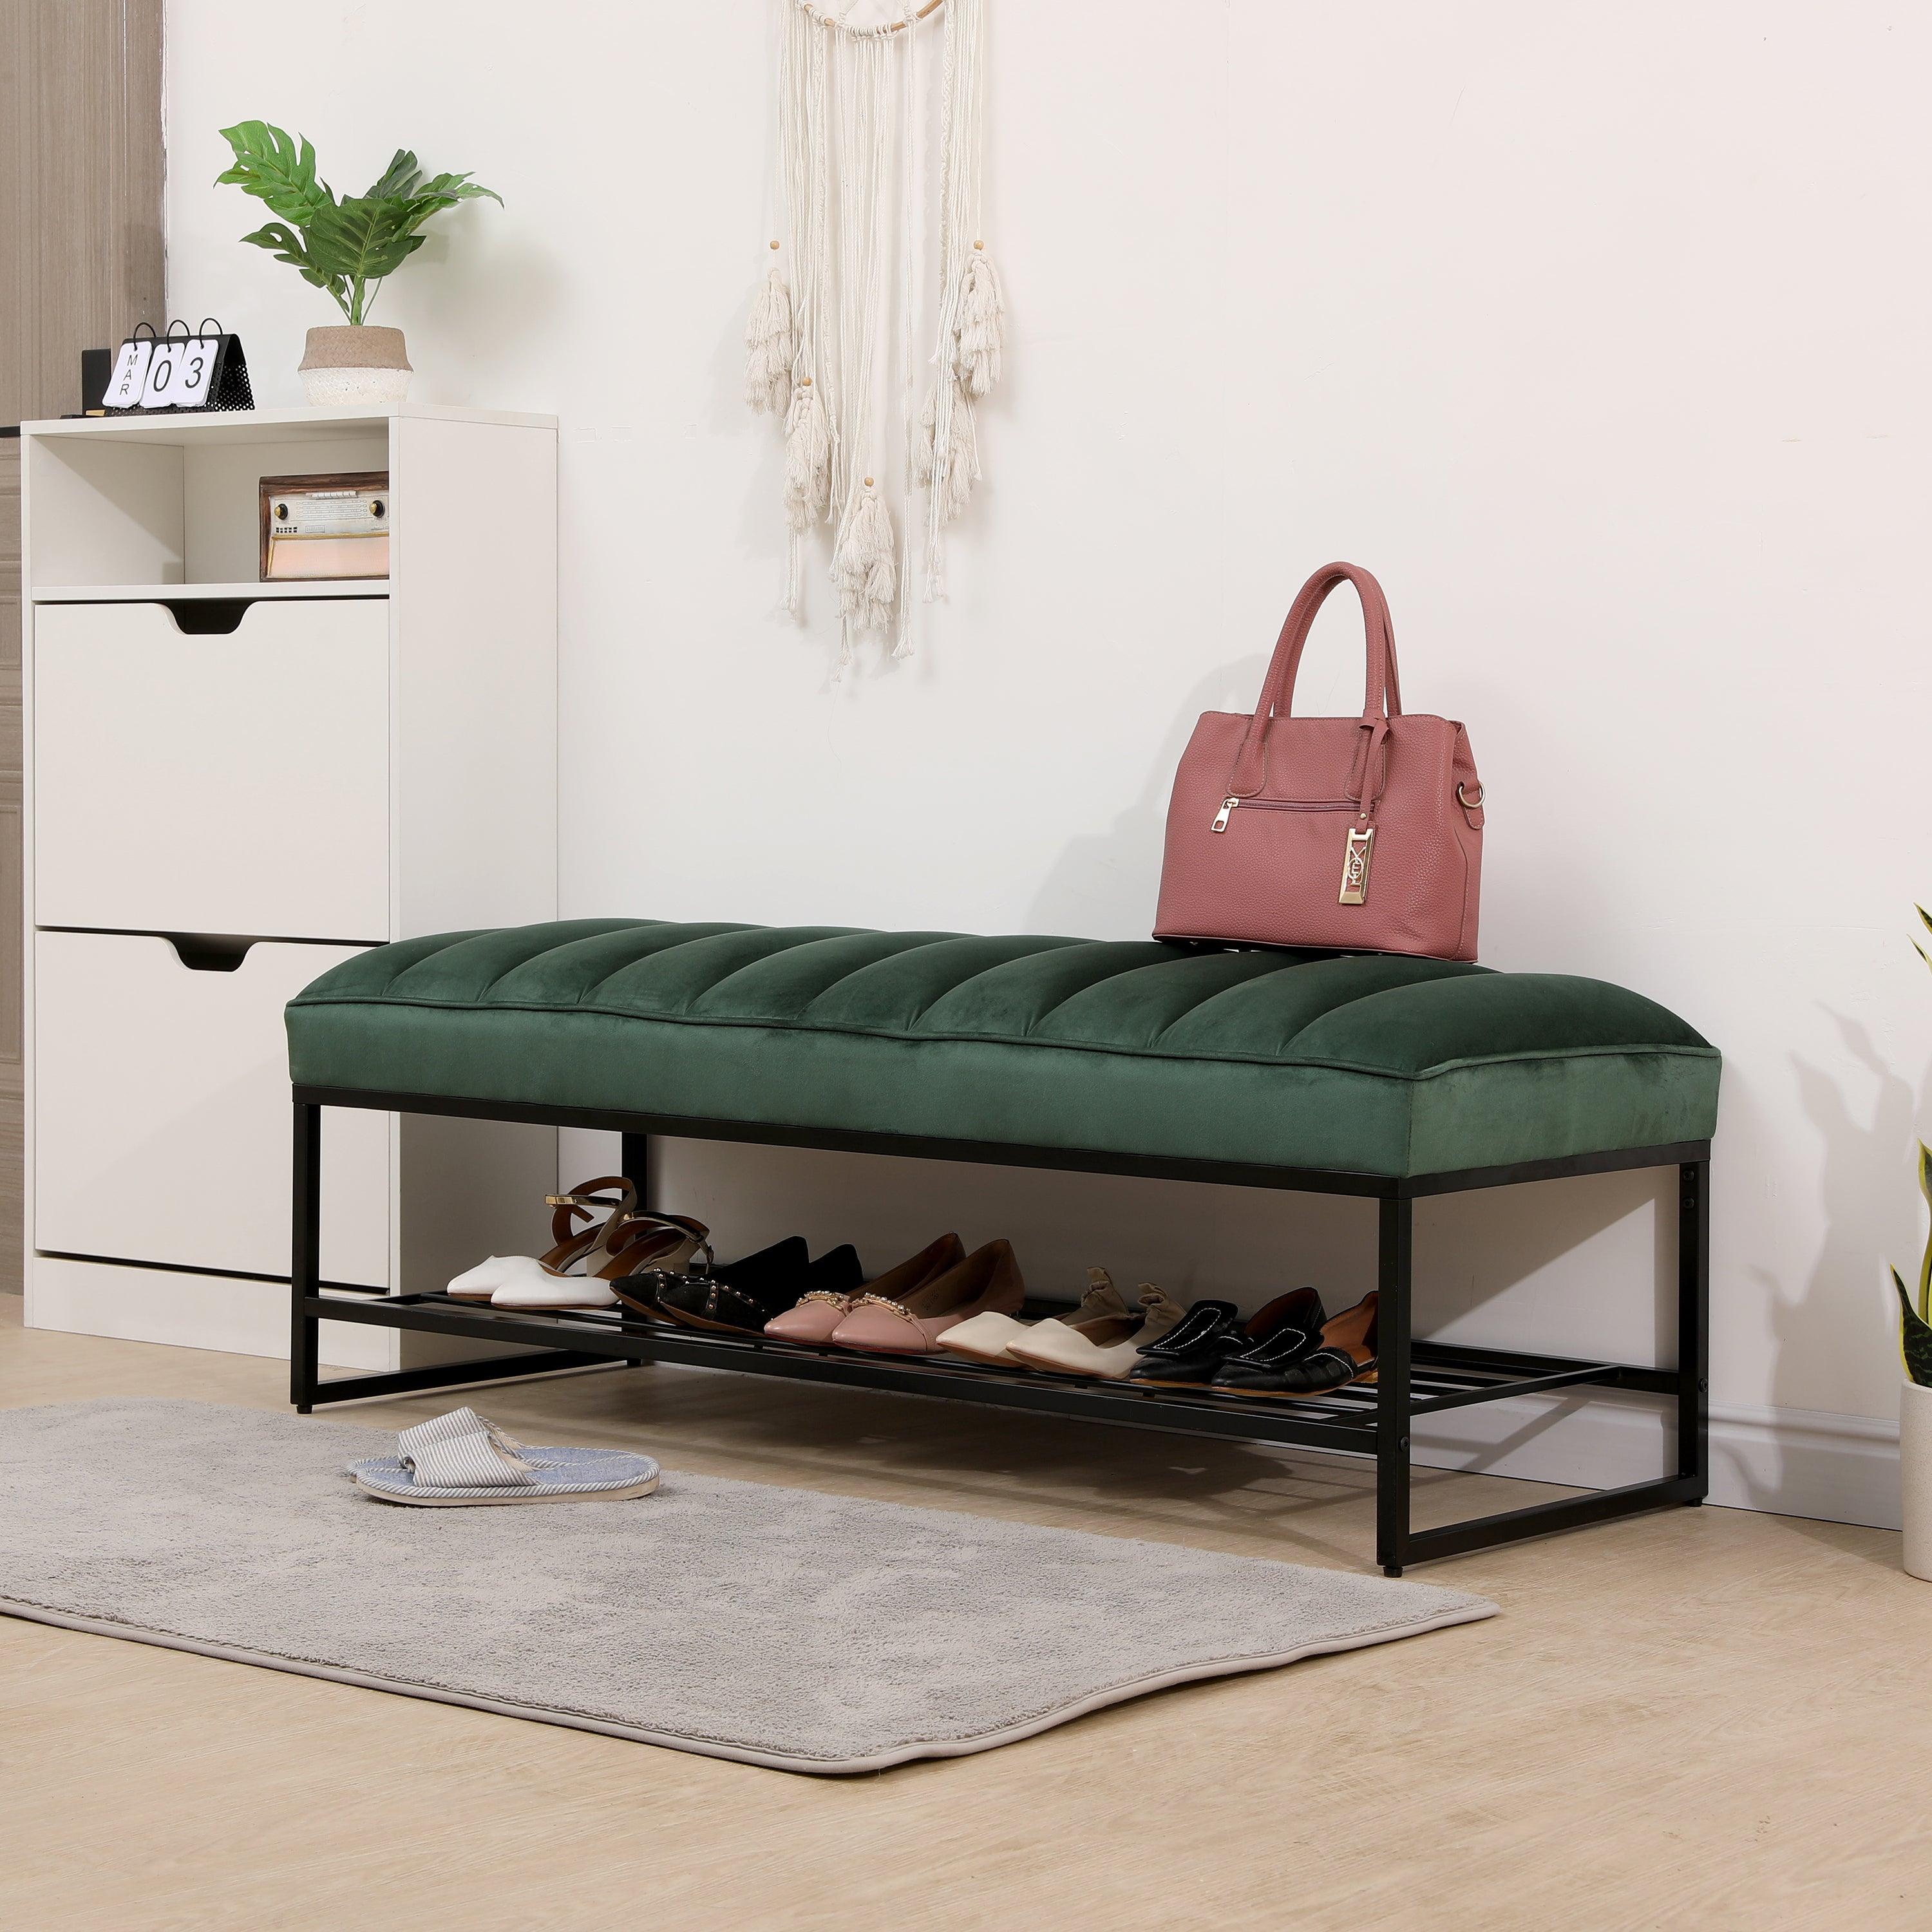 Green Velvet Channel Tufted Ottoman Bench Accent Upholstered Bendroom End of Bed Bench with Storage Shelf (Green)